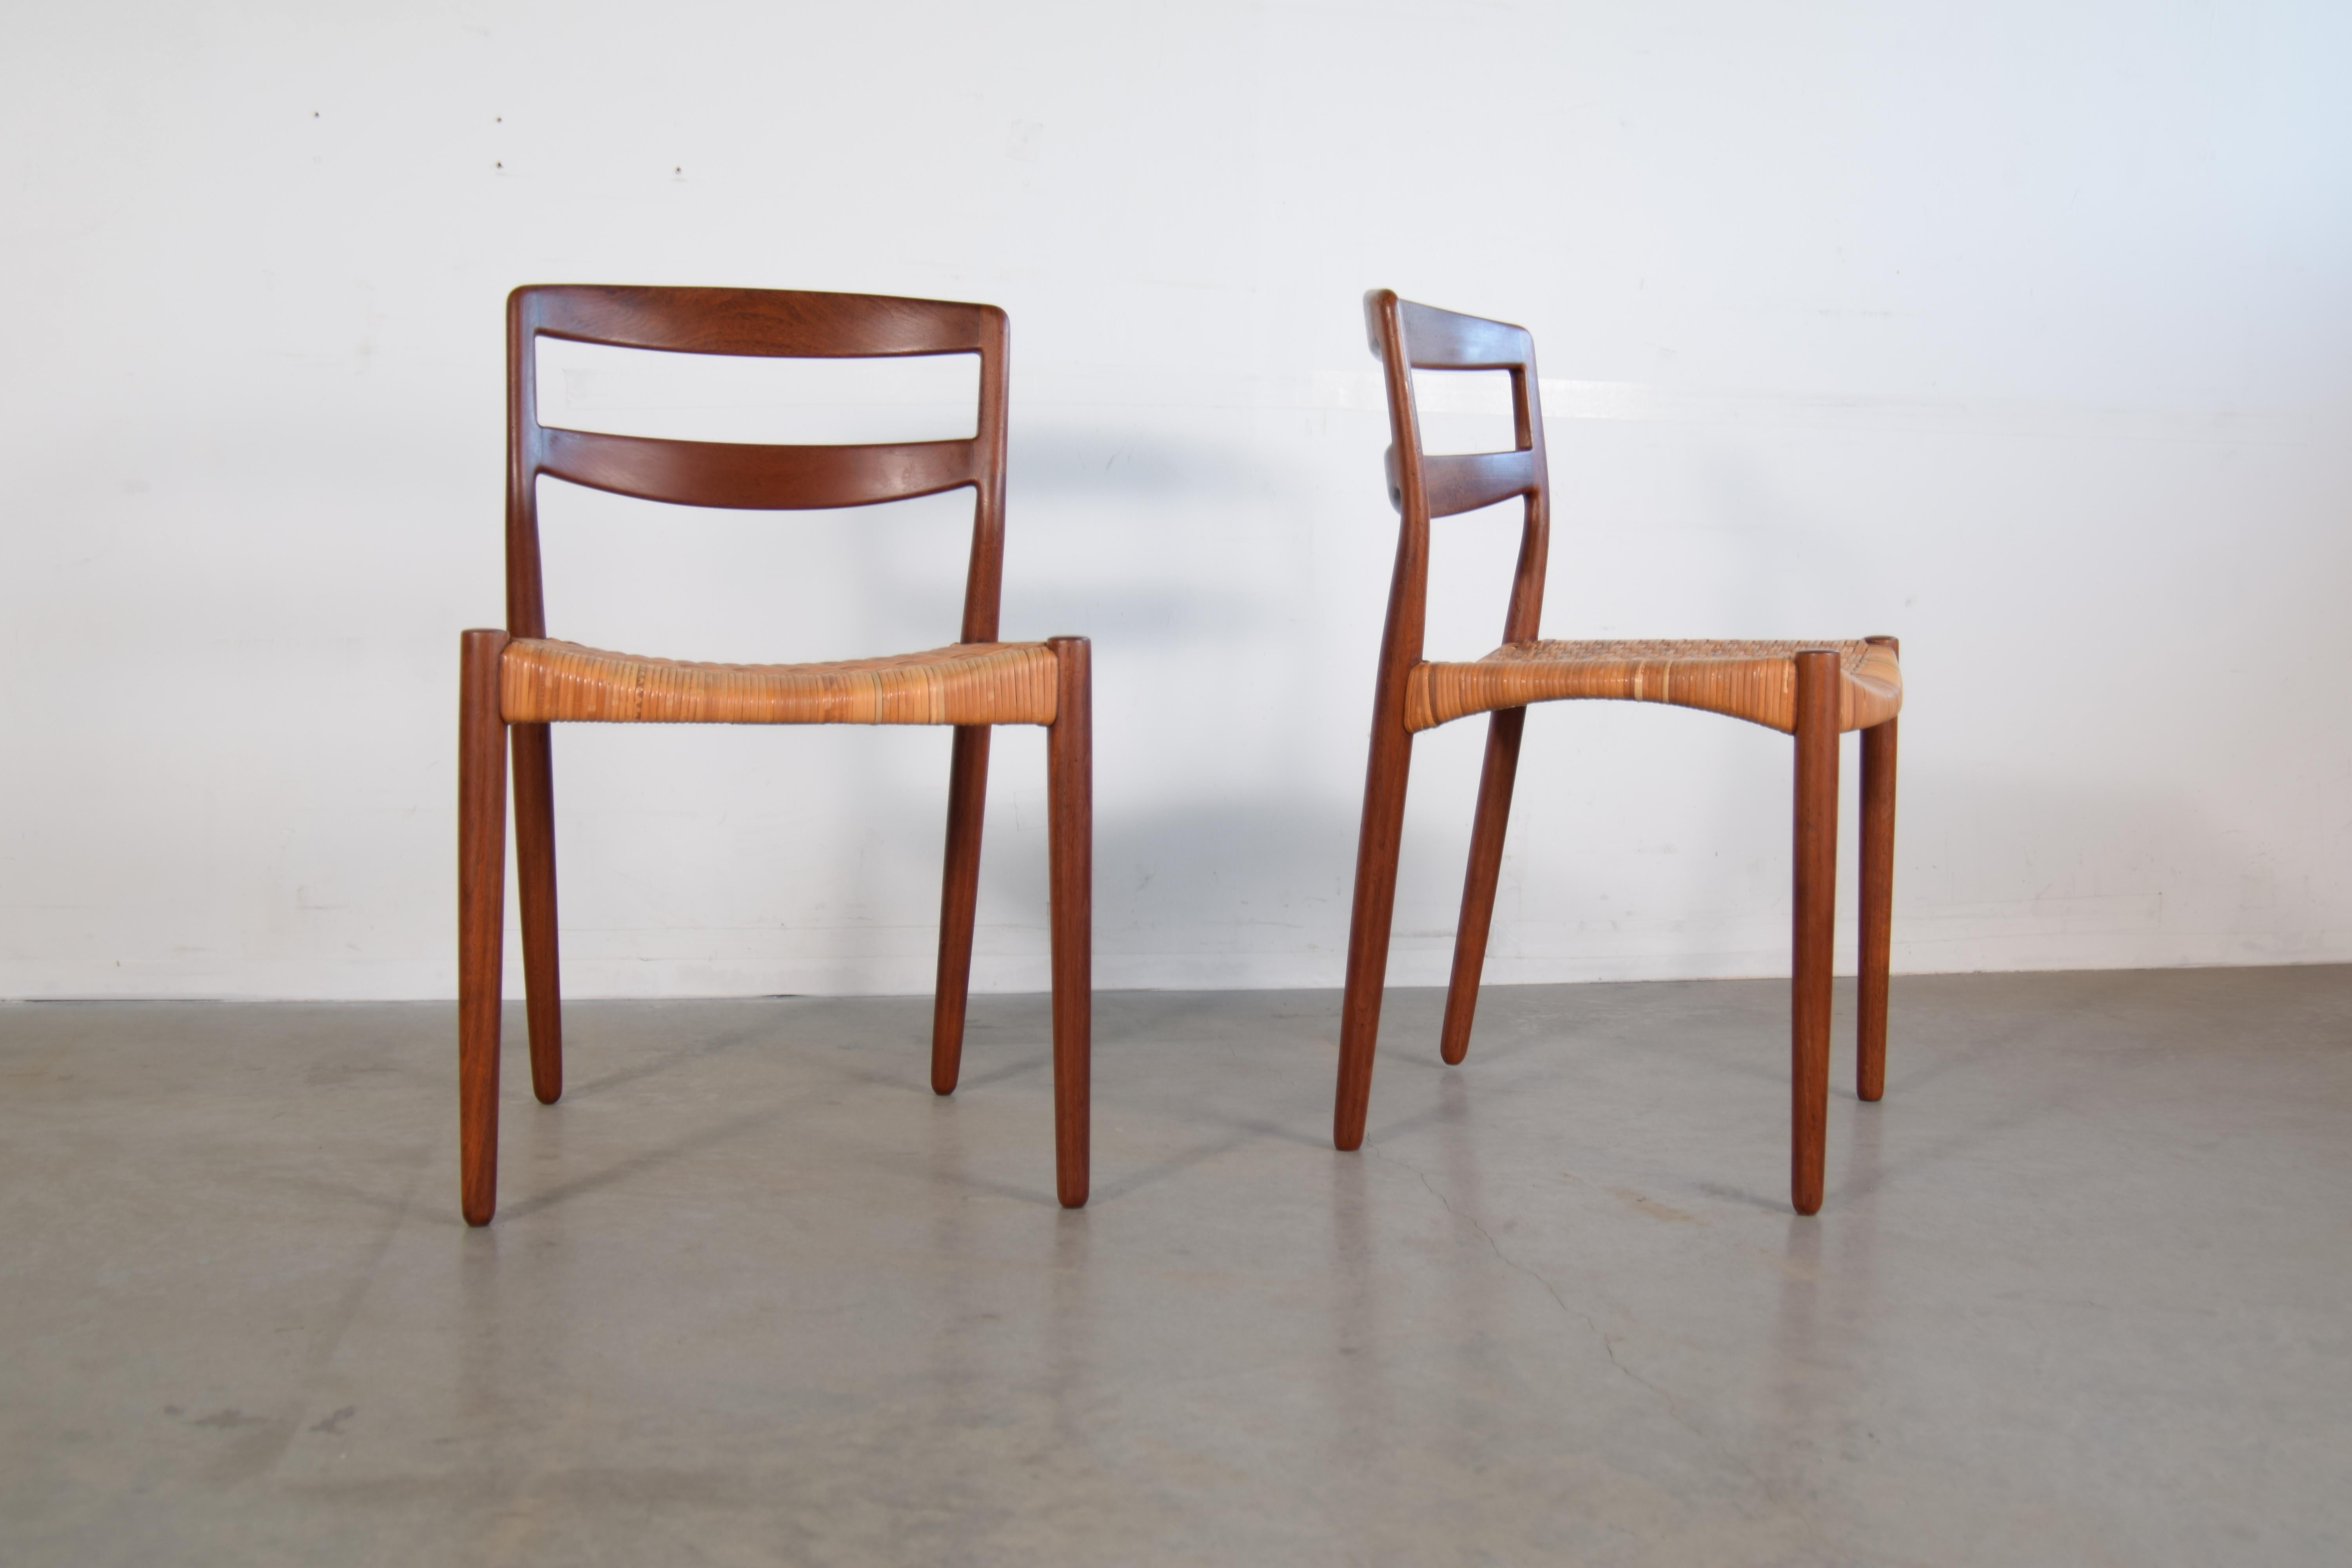 Pair of sculptural teak and cane side chairs designed by Ejner Larsen and Aksel Bender Madsen, circa 1956, and executed by Willy Beck in Copenhagen, Denmark. 

Ejner Larsen was born in Copenhagen on 30 March 1917. After training as a cabinetmaker,